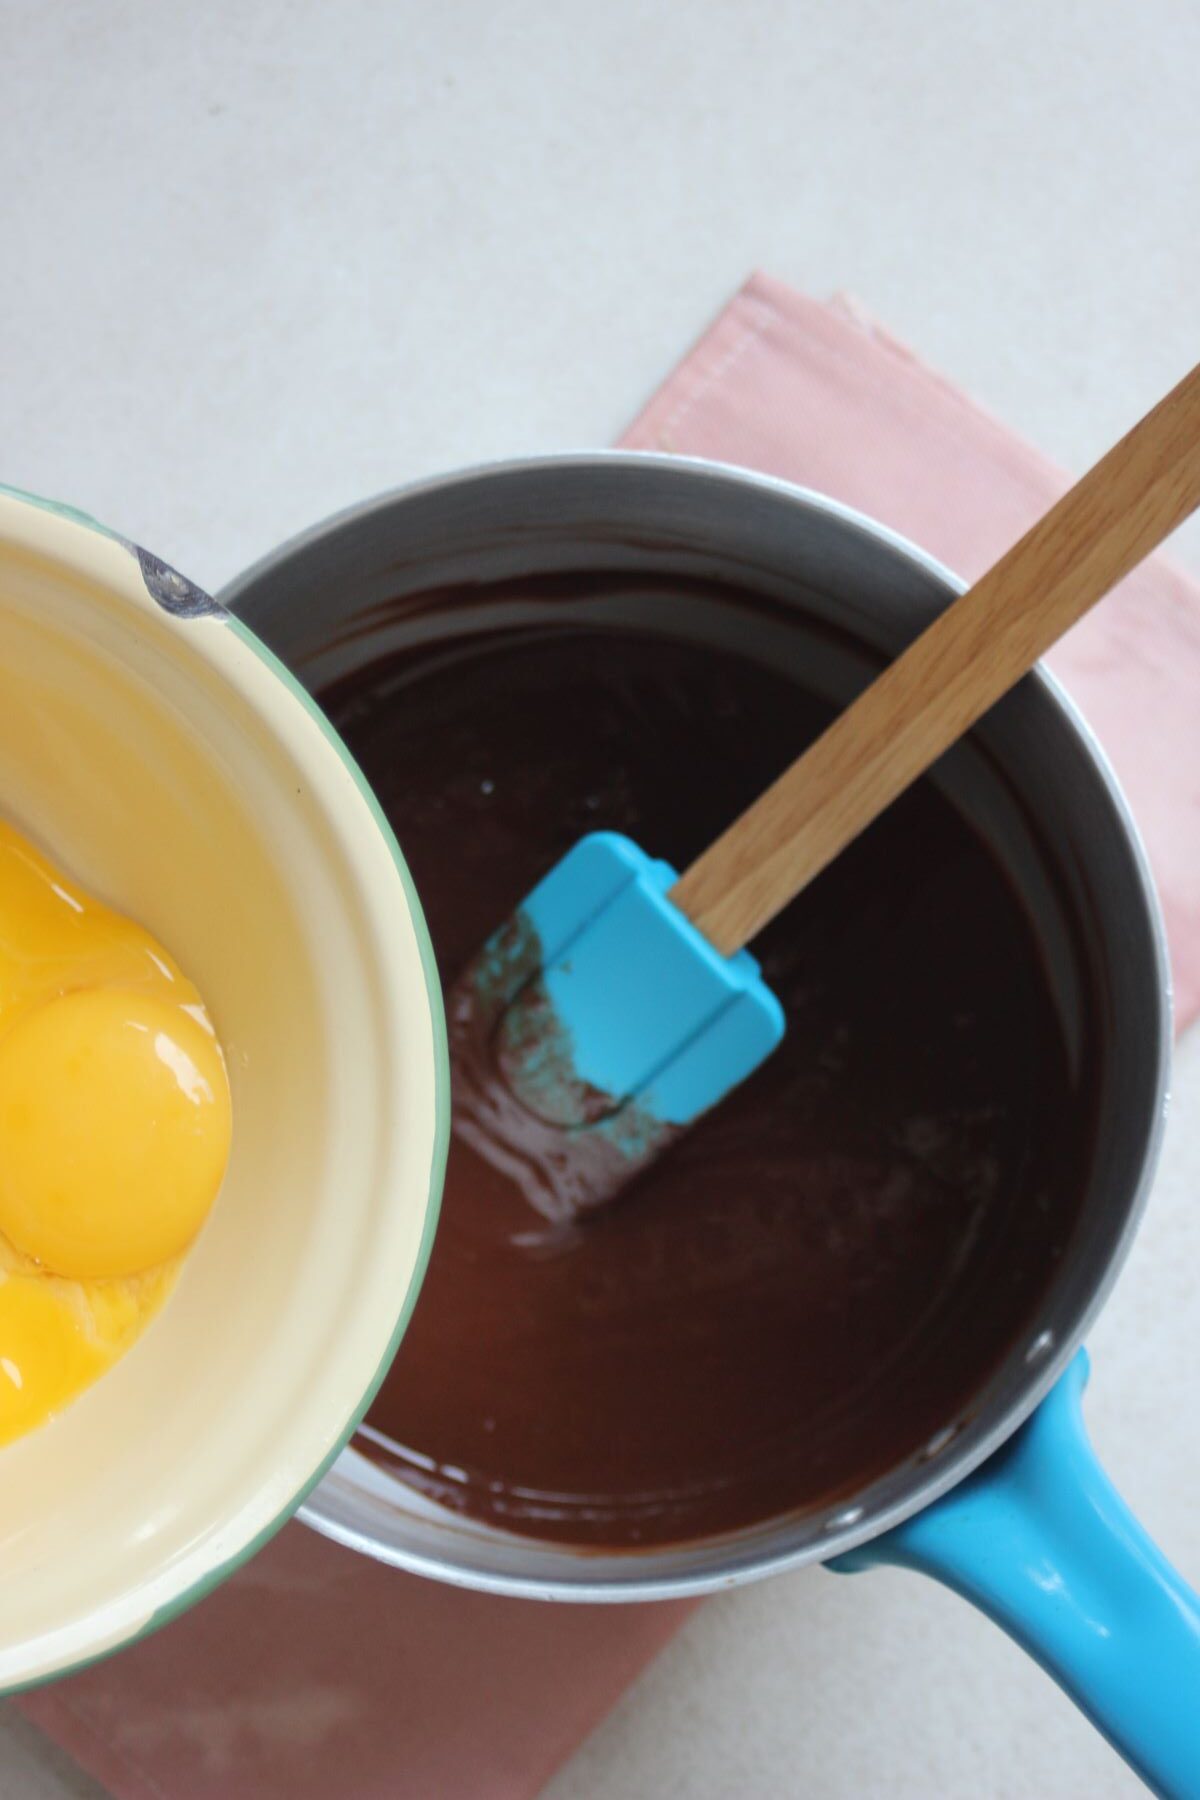 A bowl with egg yolks is about to be poured into a saucepan with melted chocolate.